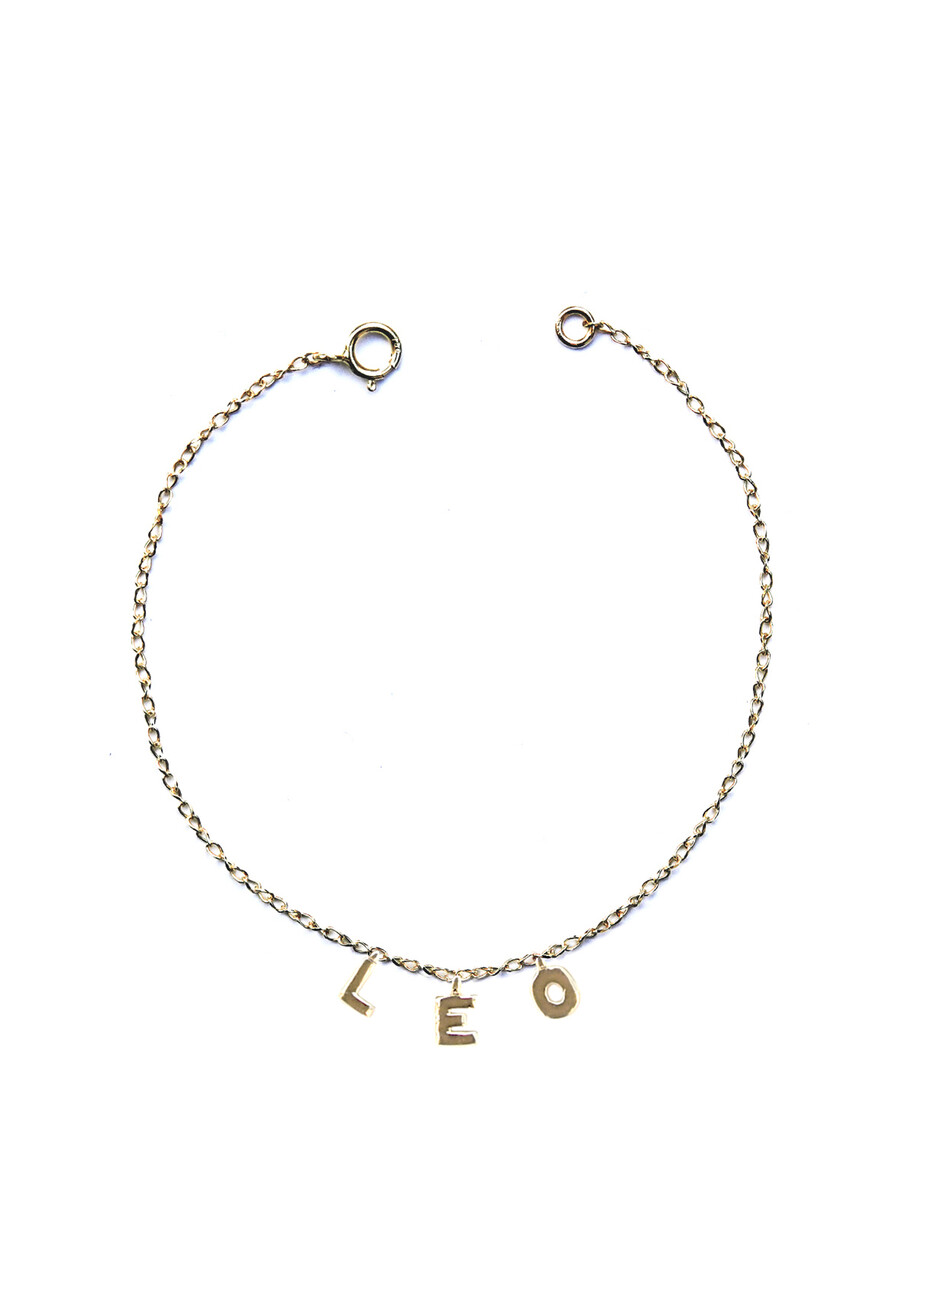 Customizable name micro letters bracelet in 18kt solid gold